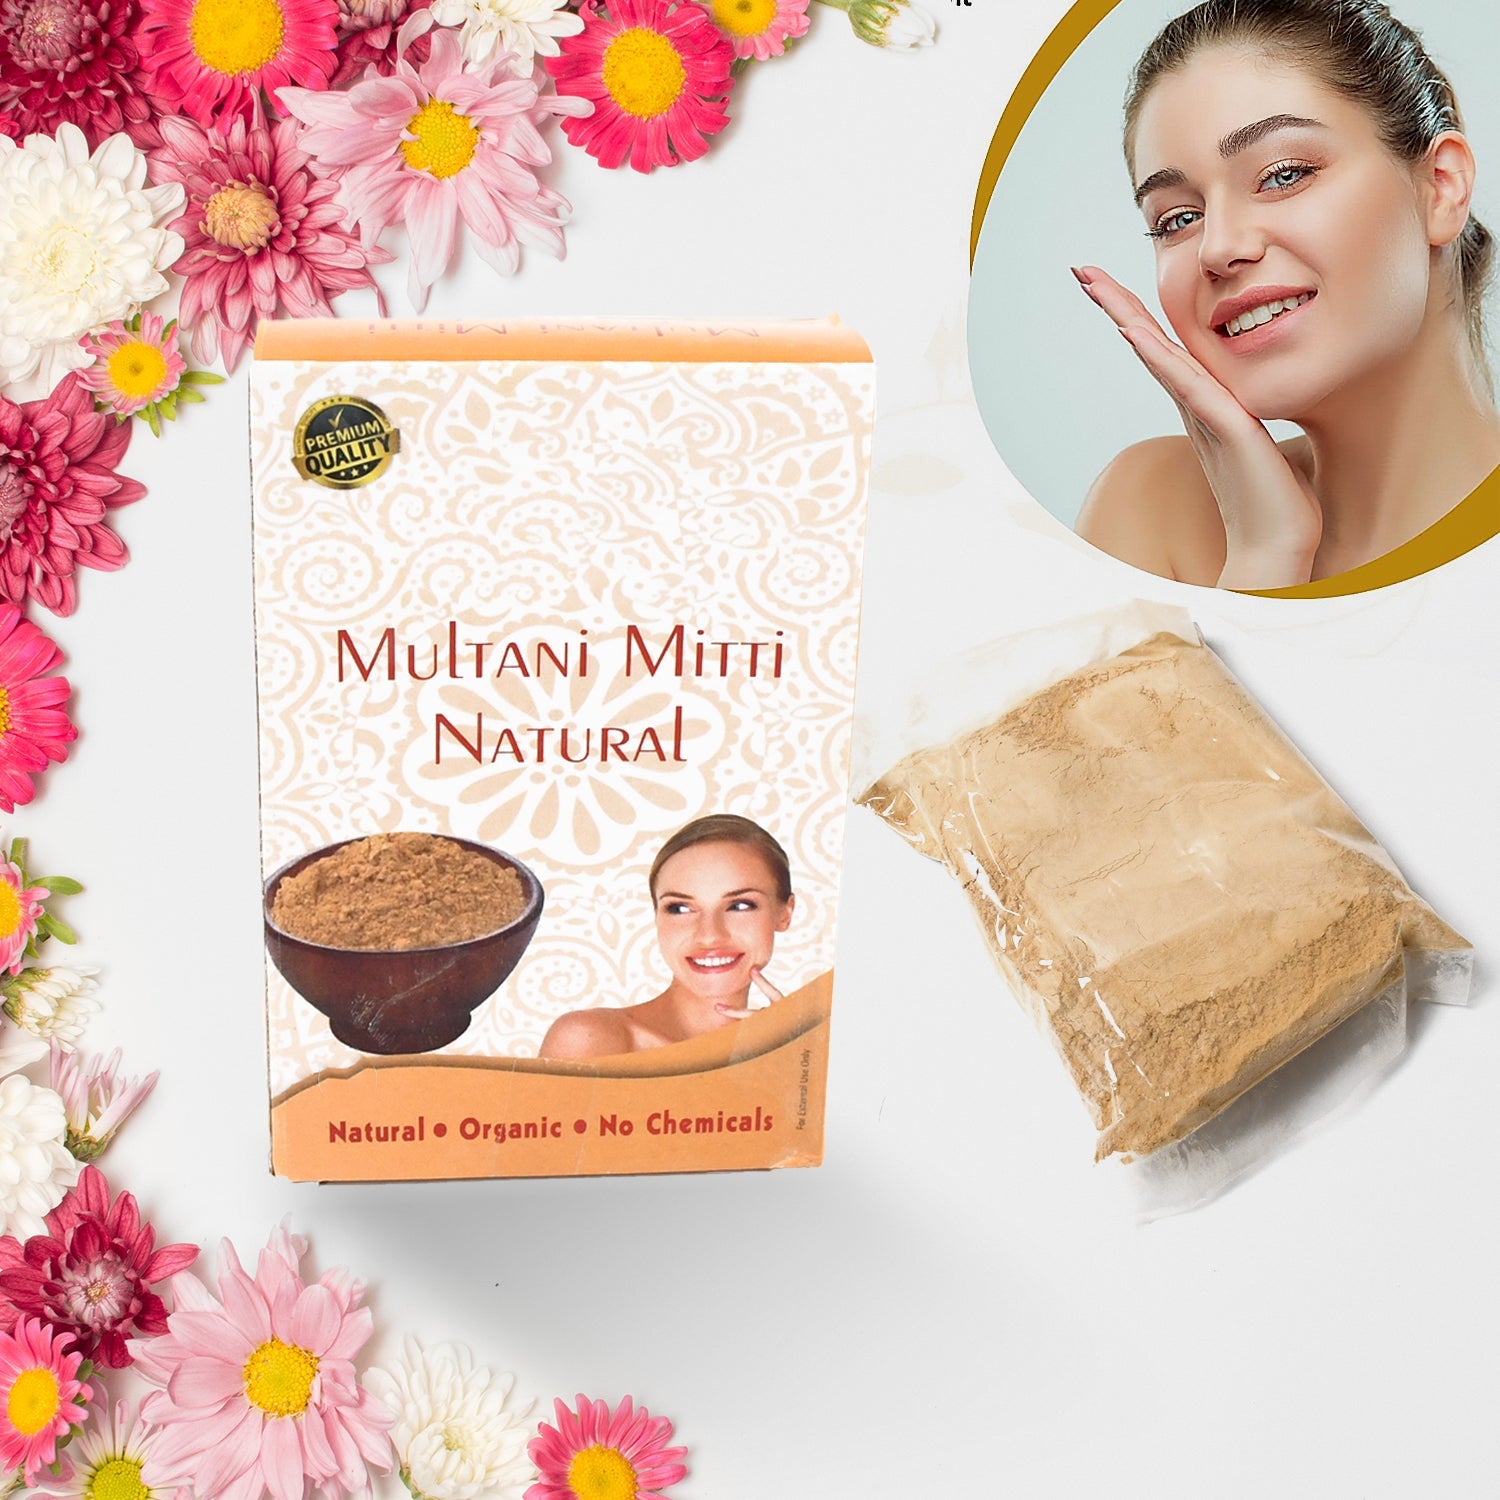 12791 80gram Herbal Tan Removing Multani Mitti Face Pack For Skin Care Age Group